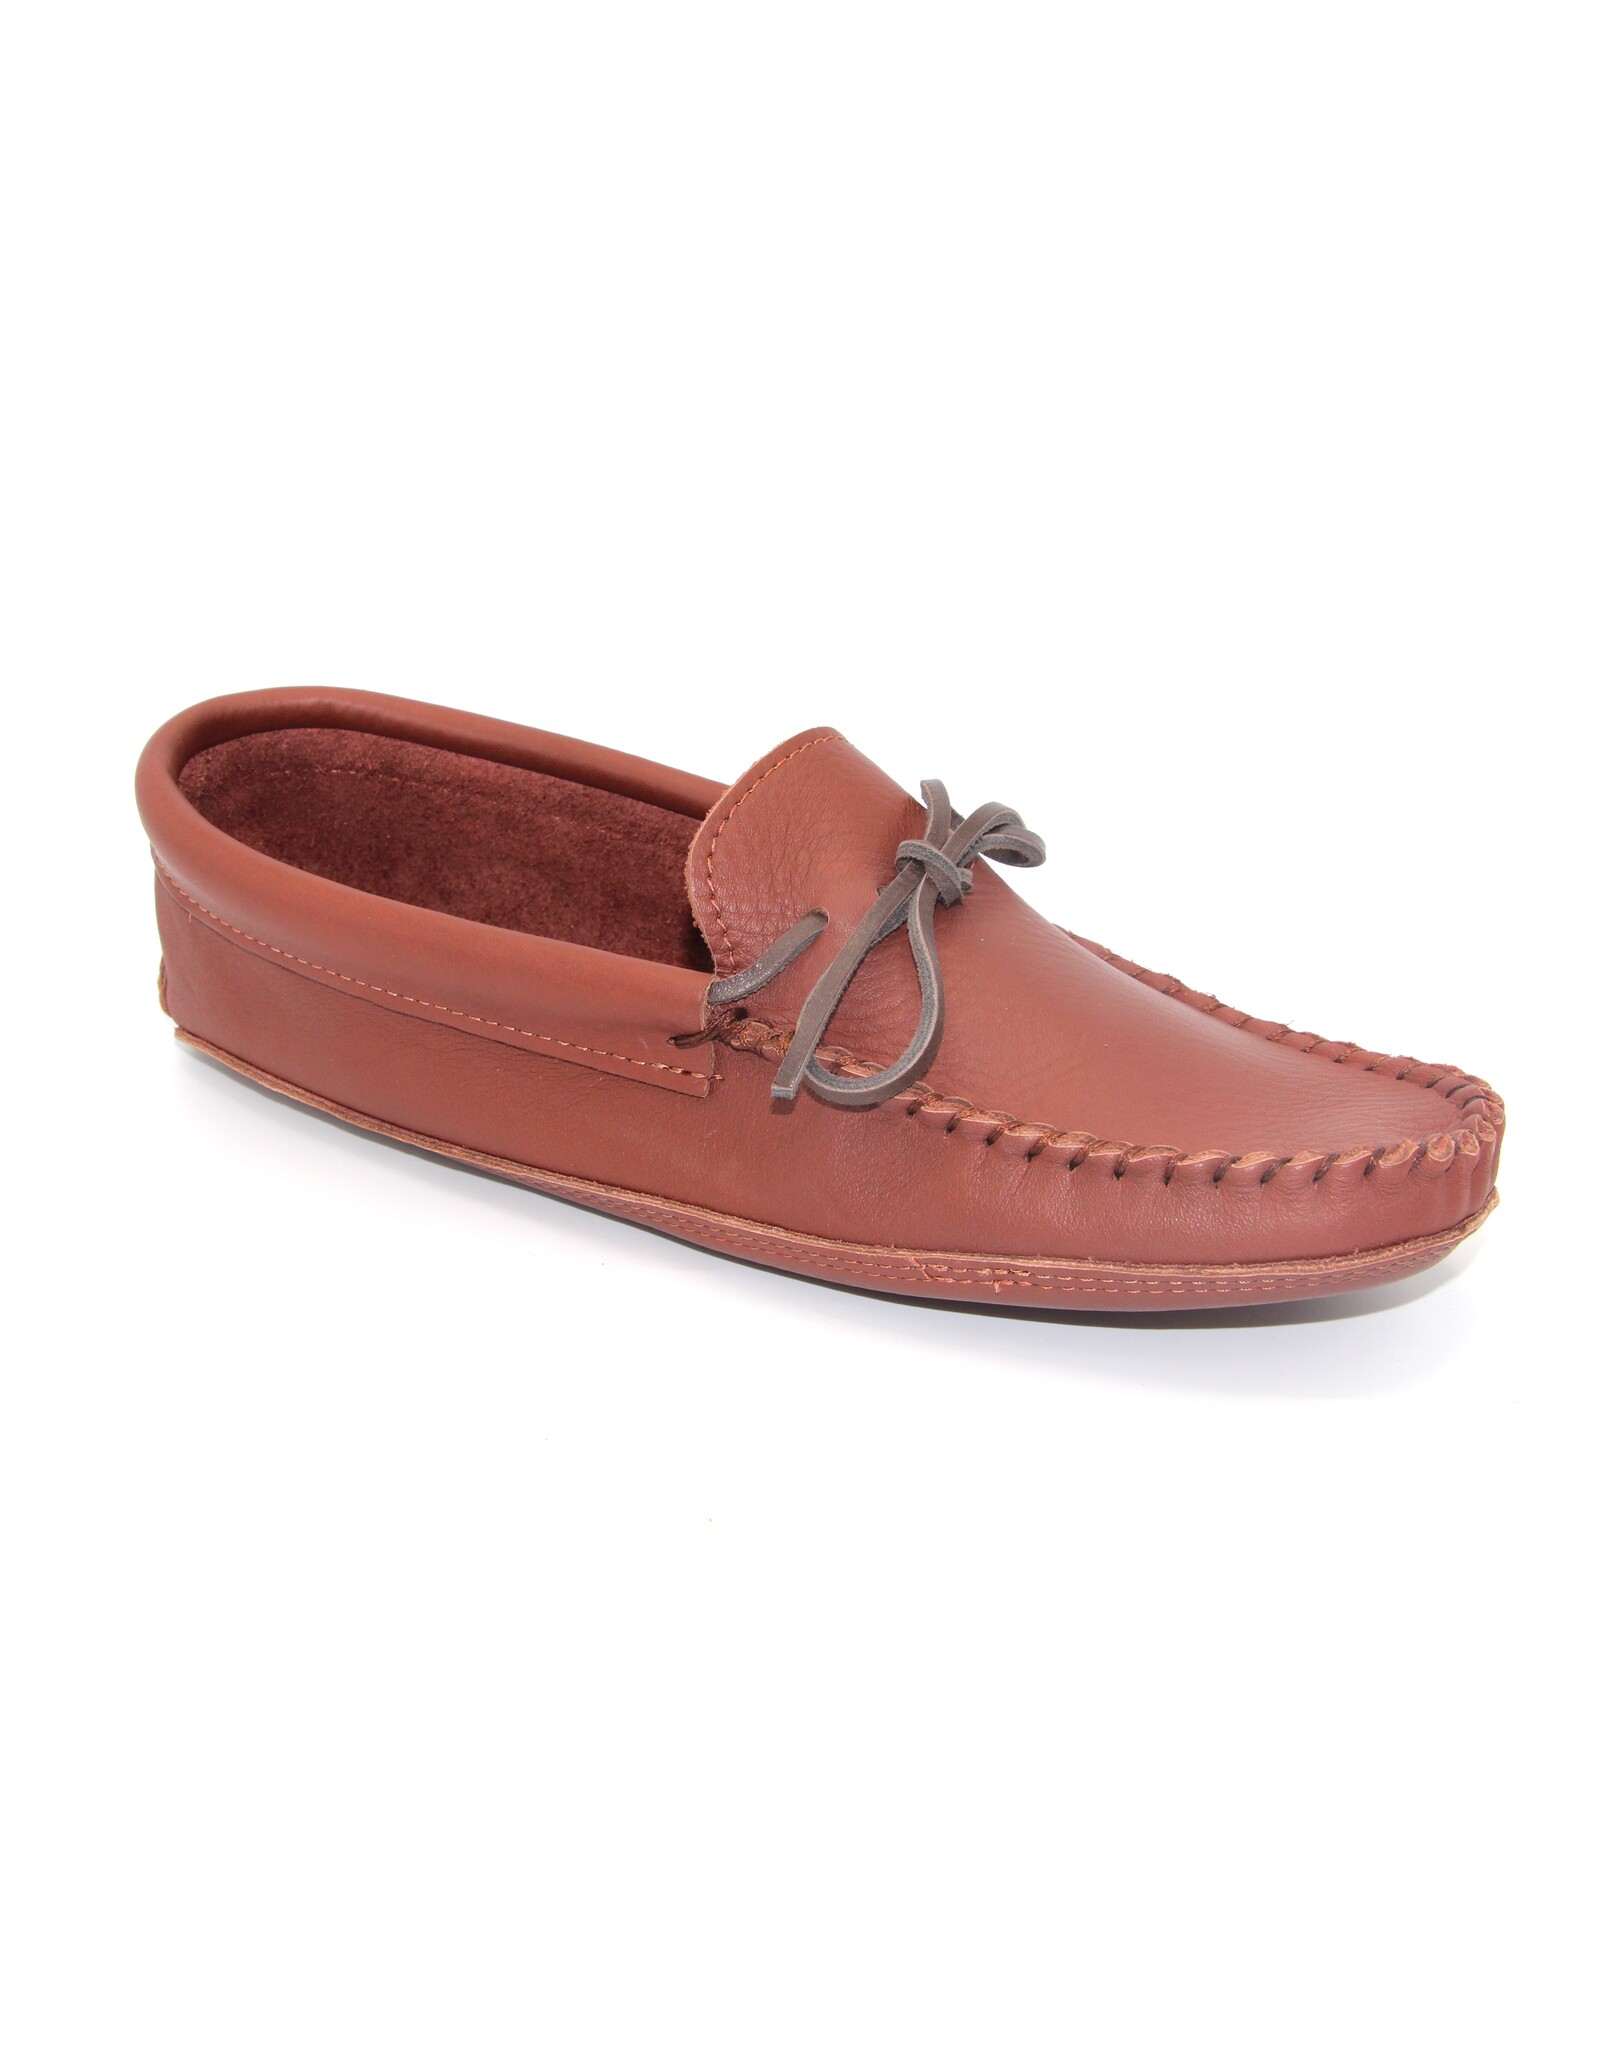 Chocolate Padded Sole Moccasin - 3112M